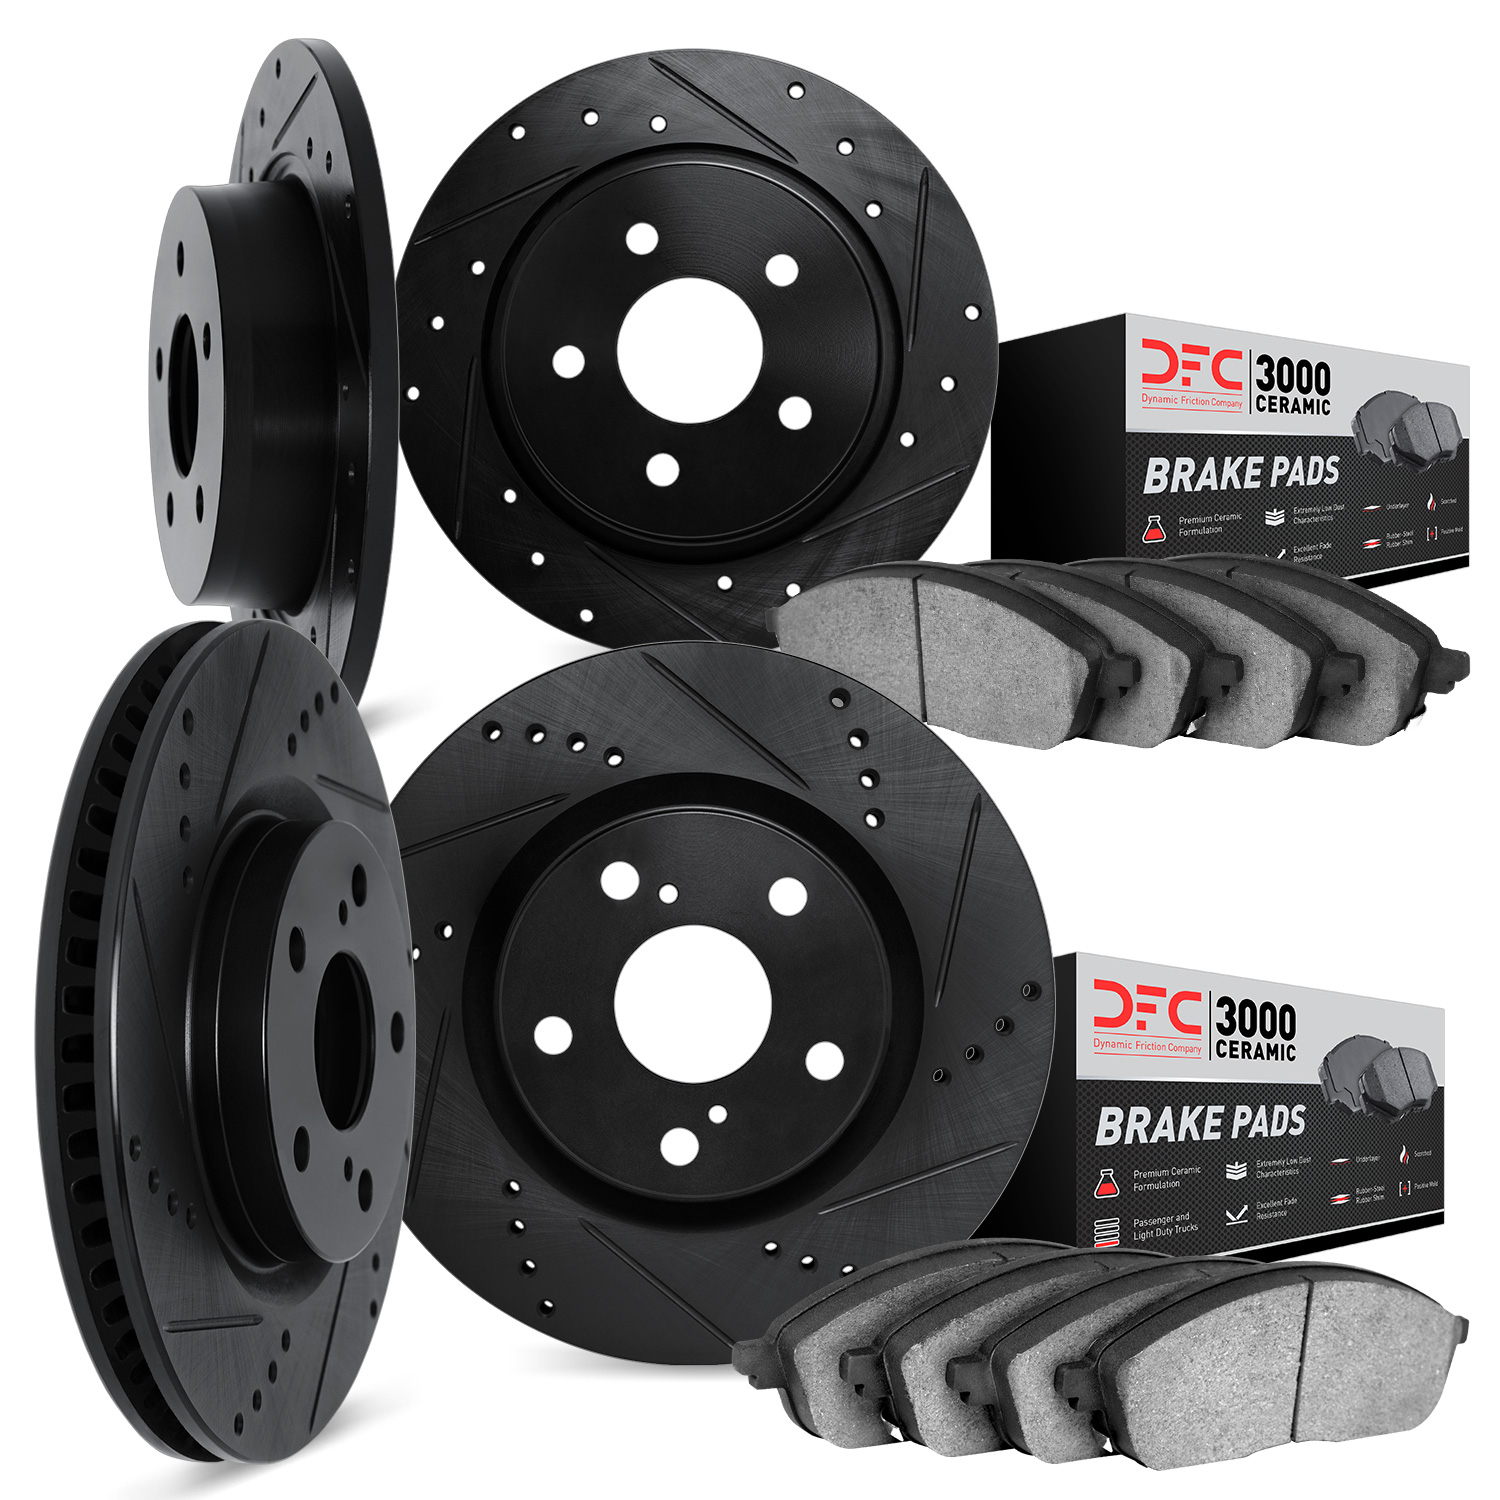 8304-13026 Drilled/Slotted Brake Rotors with 3000-Series Ceramic Brake Pads Kit [Black], 2004-2006 Subaru, Position: Front and R